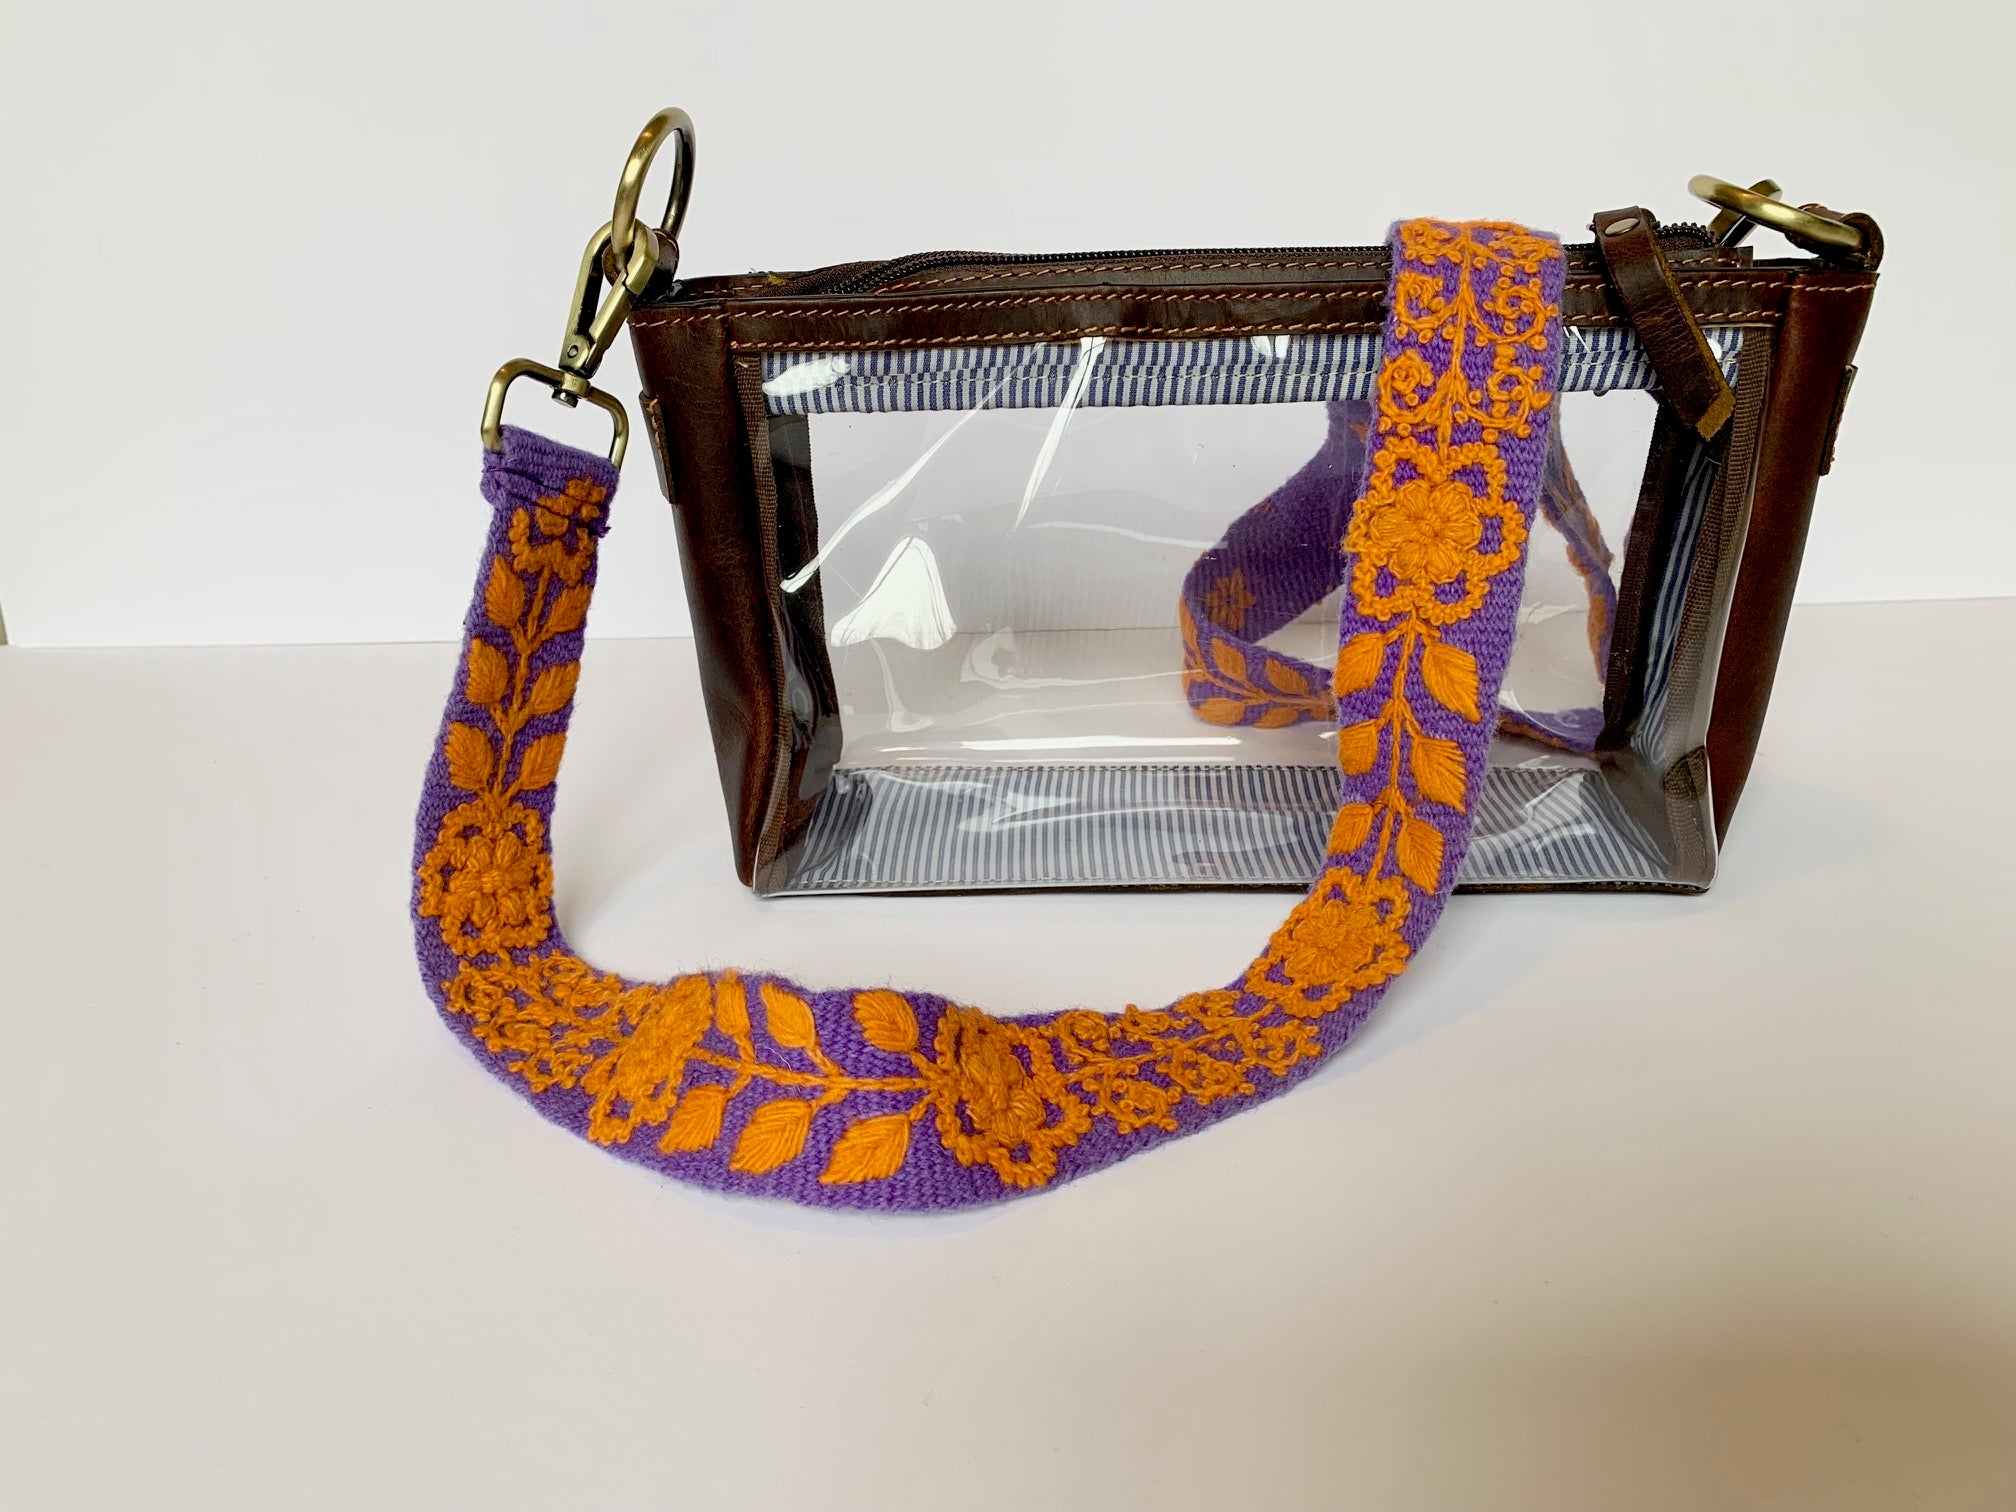 Katy Adjustable Purse Strap shown with fair trade clear purse